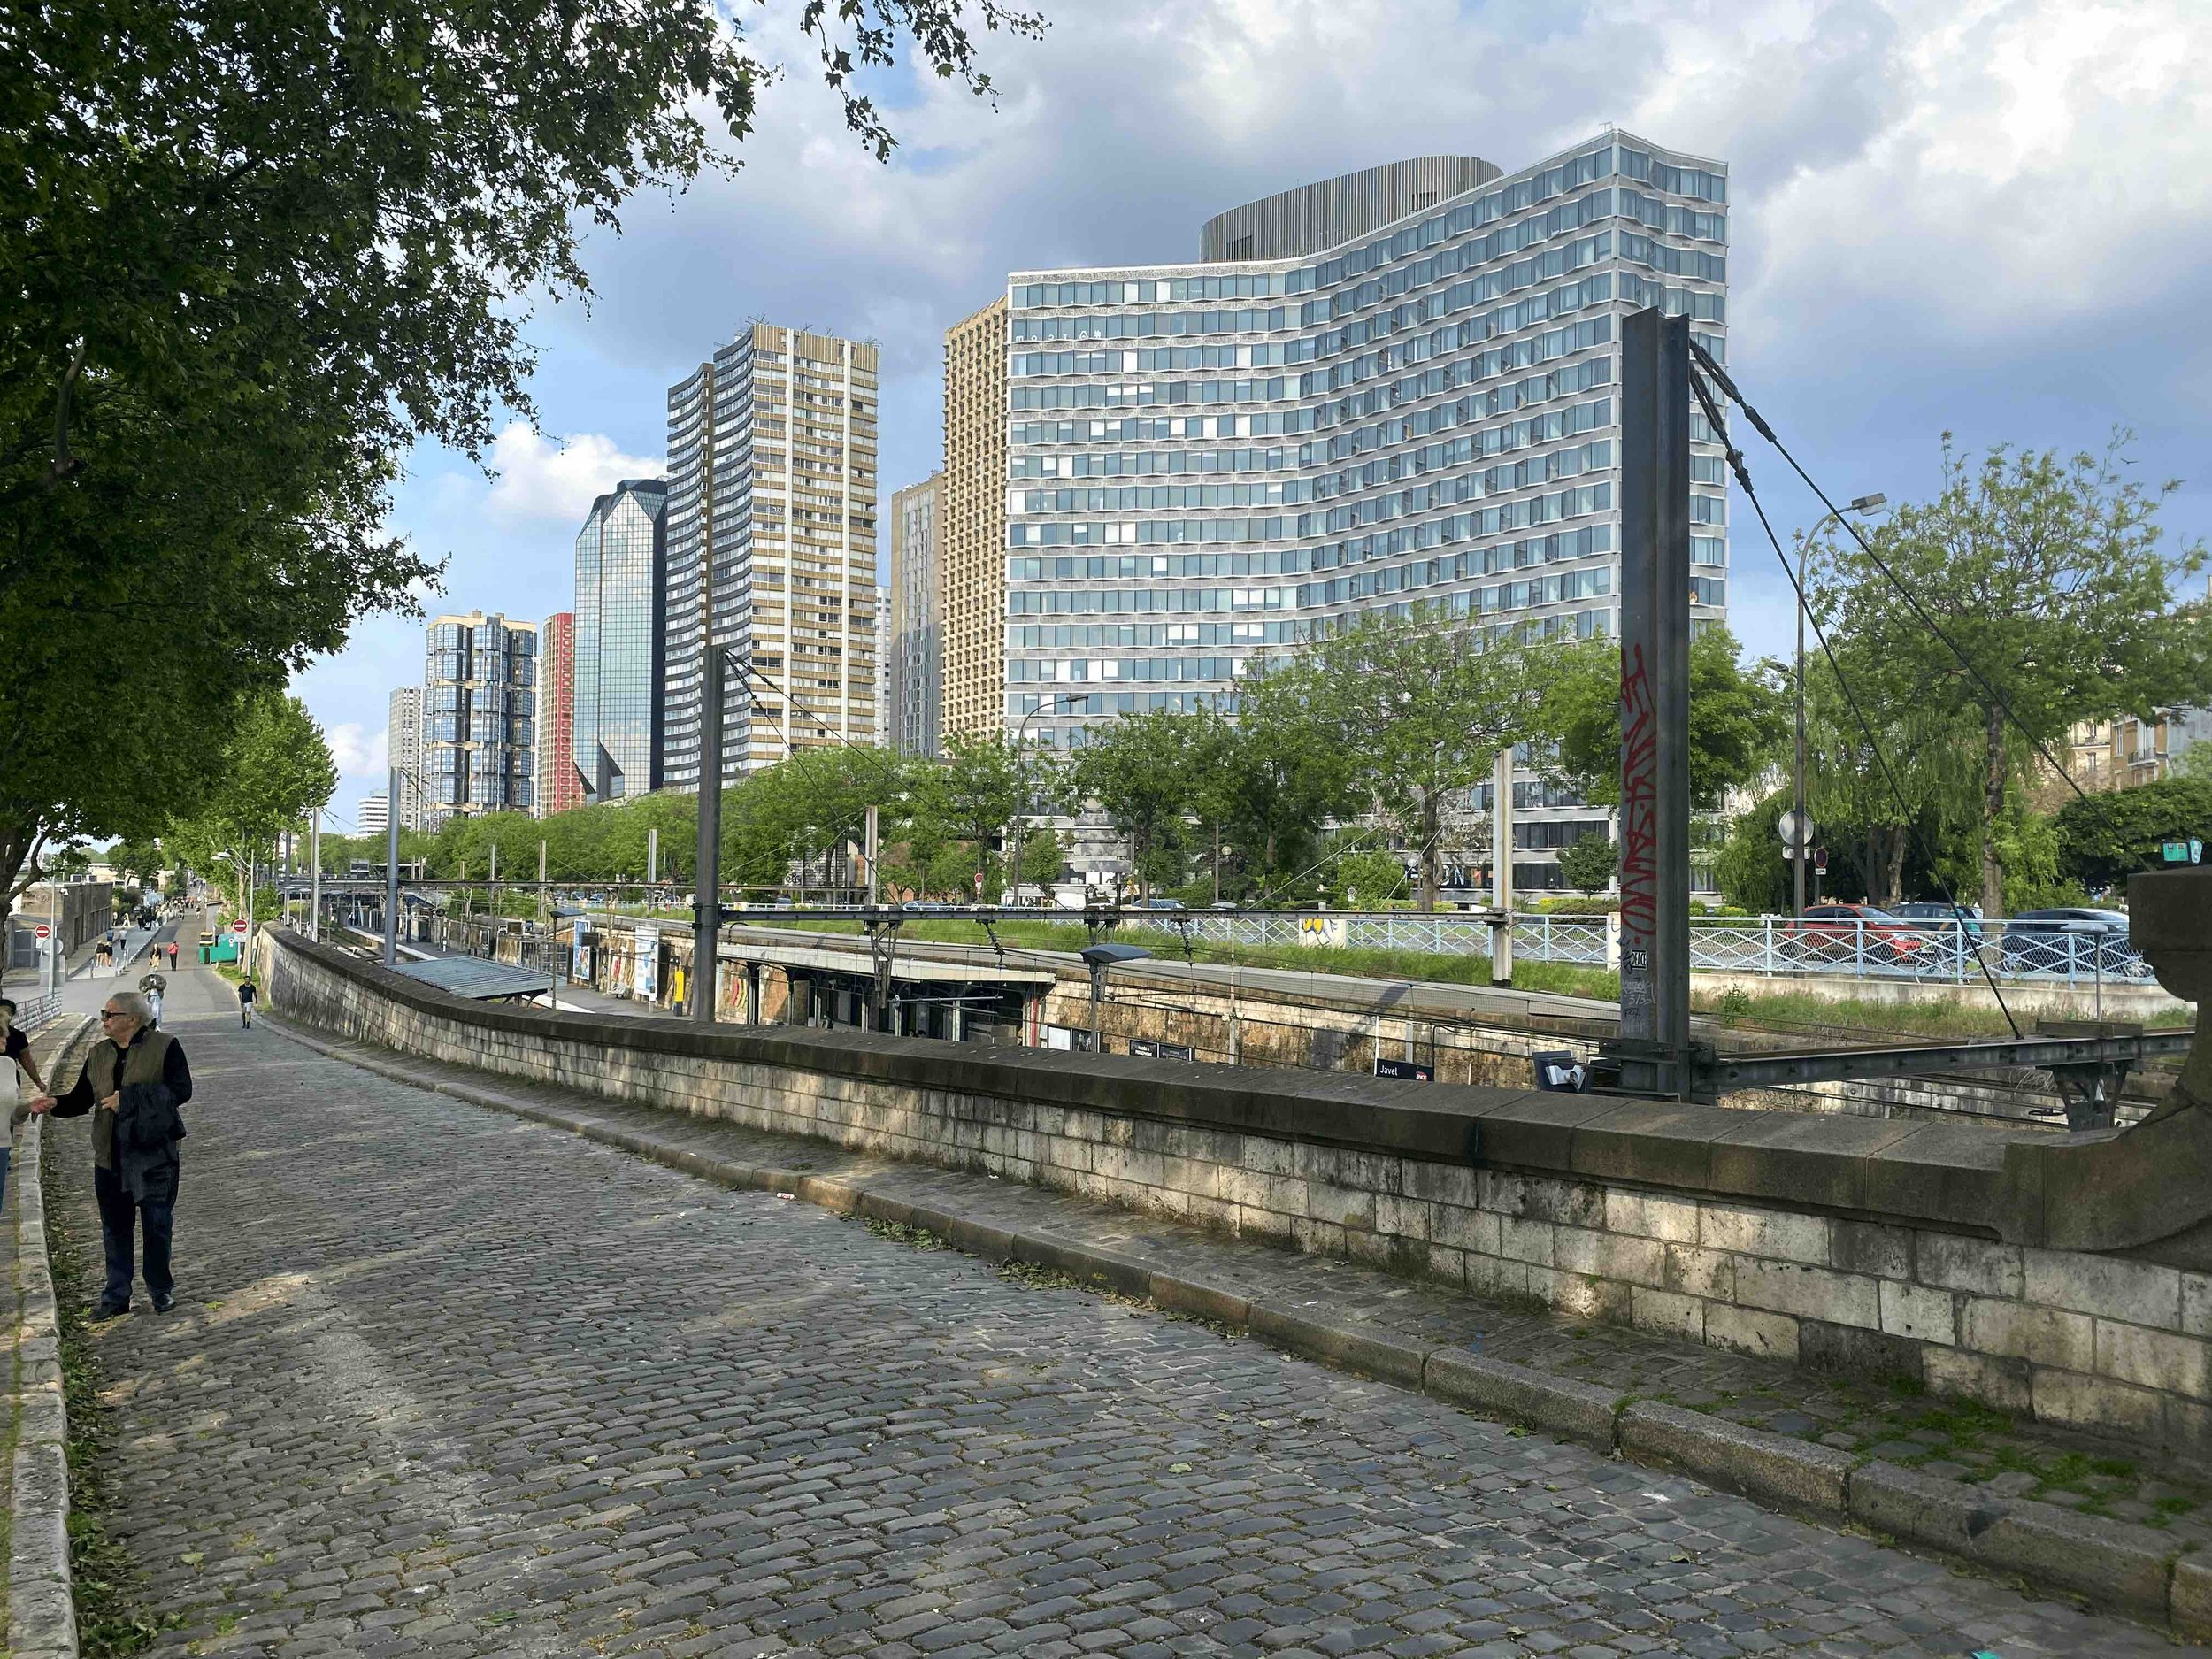  The cycling and activity path, adjacent to the RER, offers a vista of the building blocks that once were the hub of industrial activity, like the Citroën factory. Over several centuries, these edifices have given way to a modern skyline showcasing a